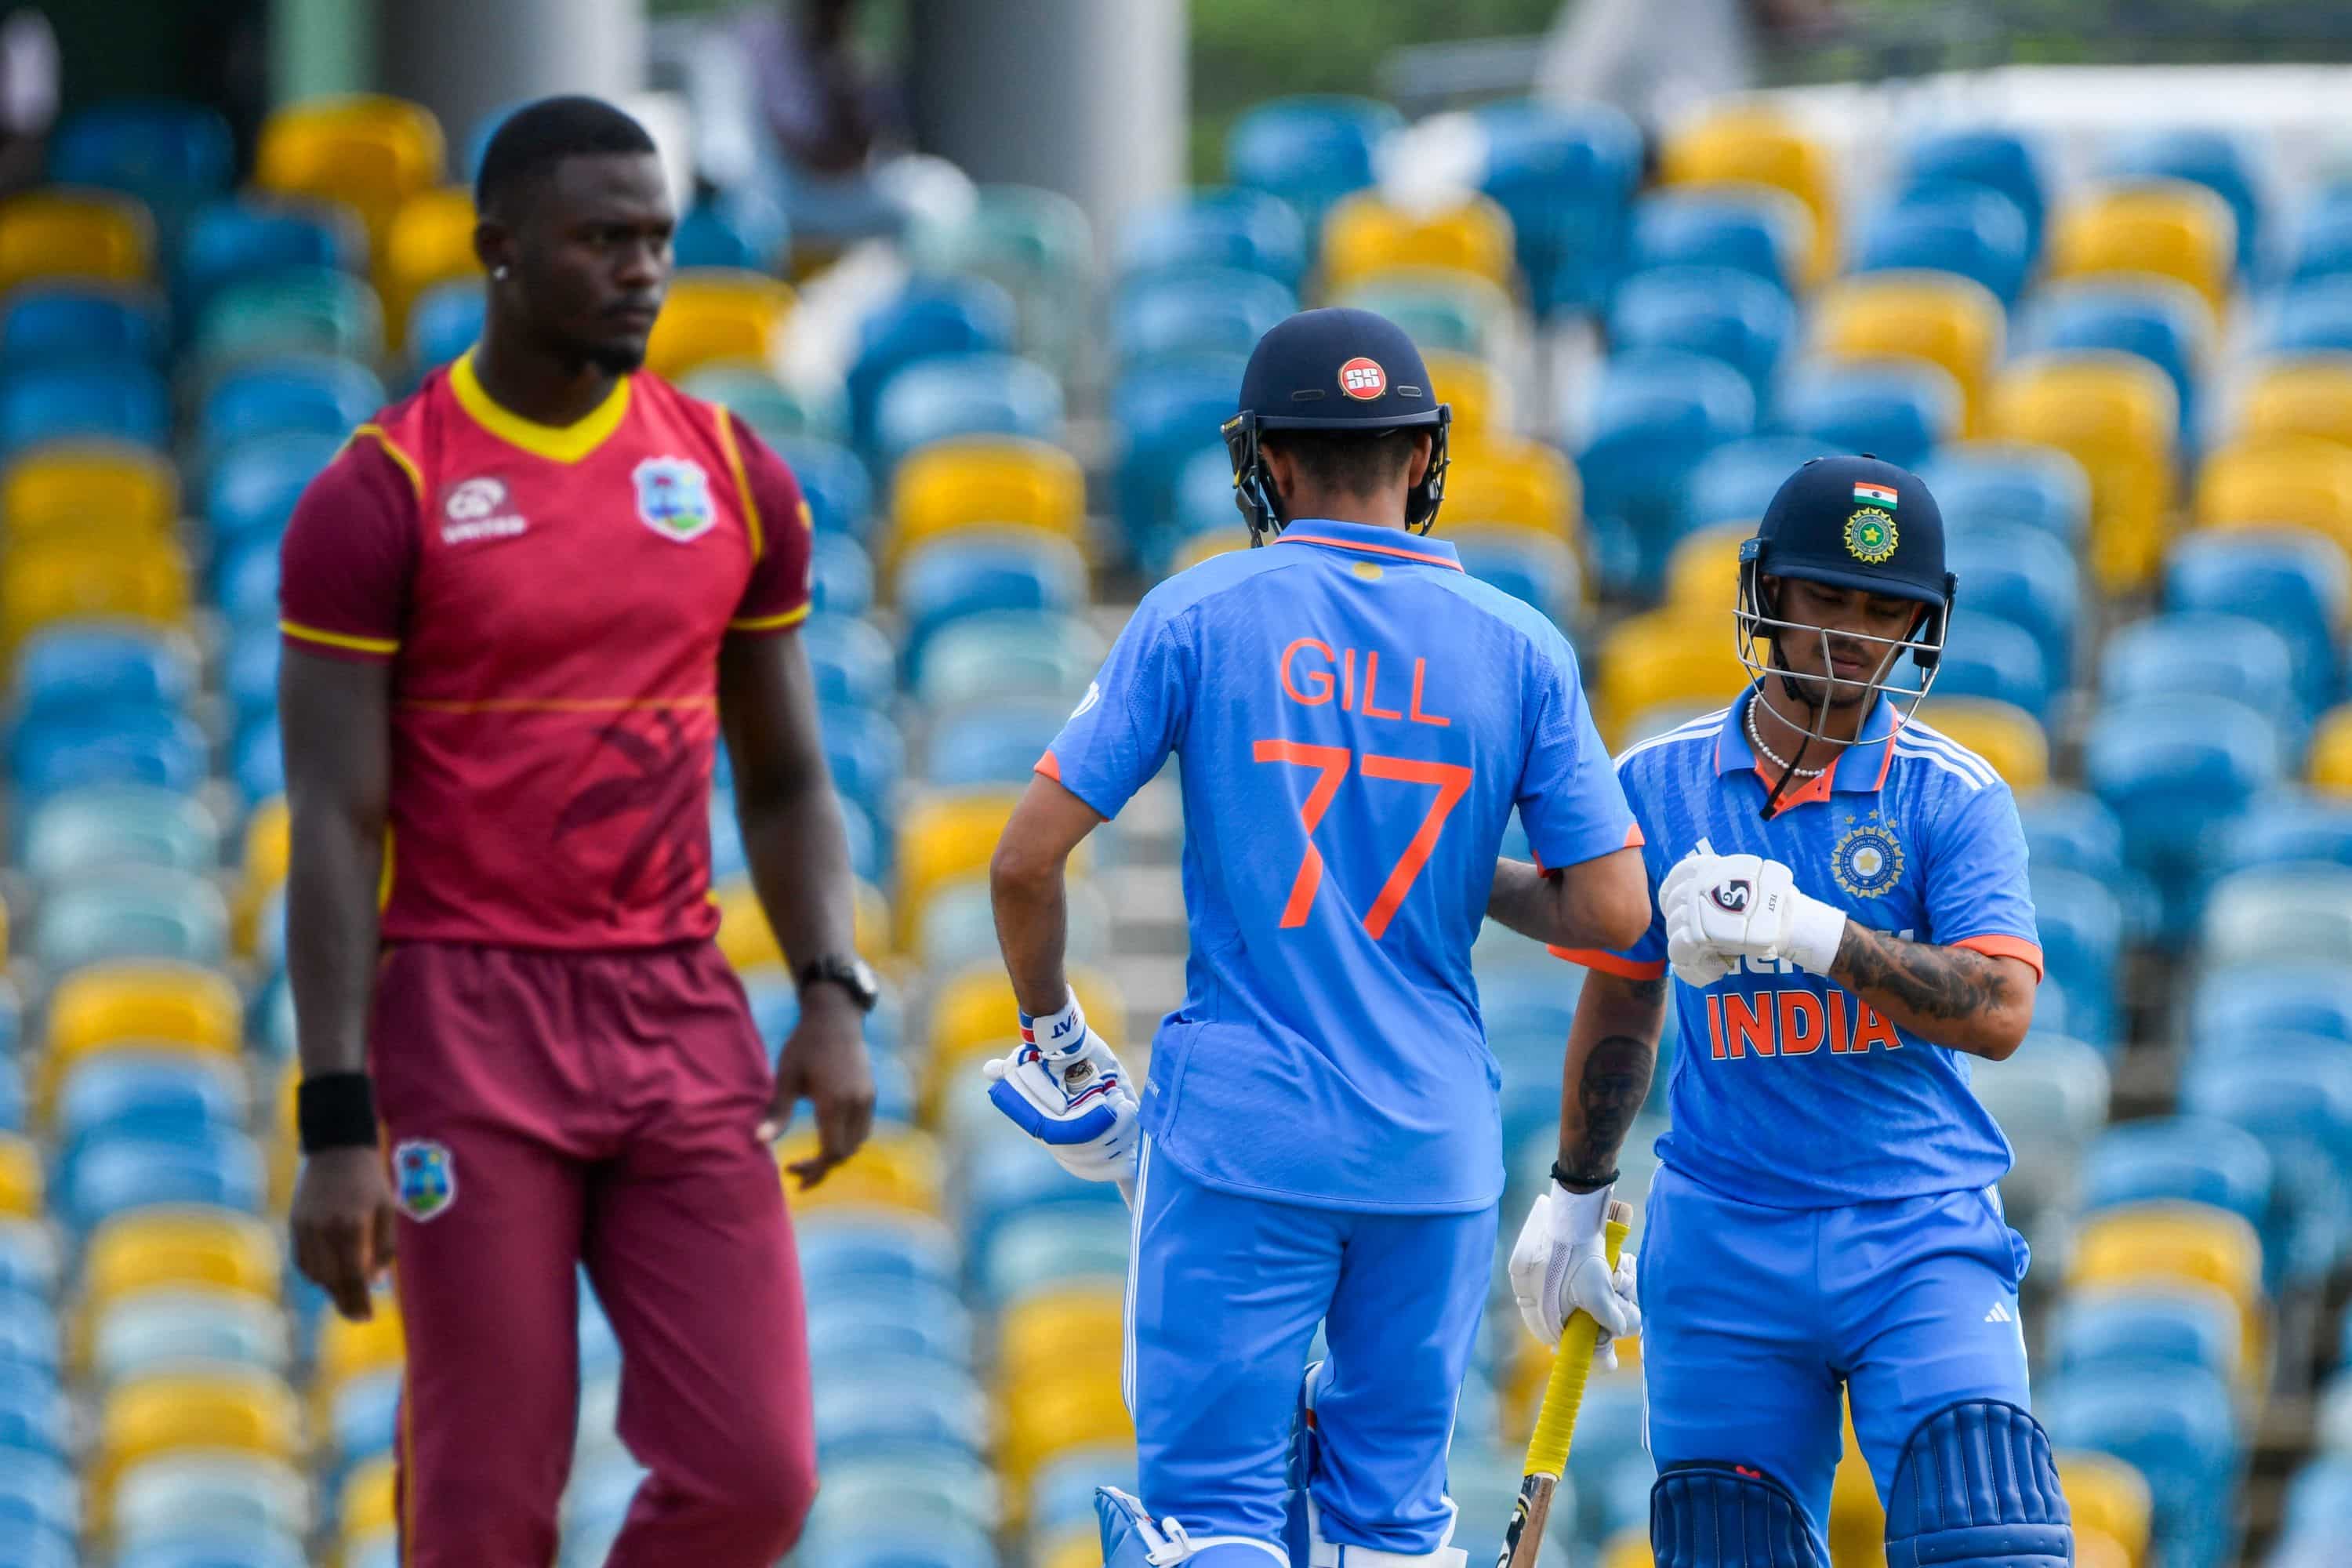 India vs West Indies Free Live Streaming: When and where to watch IND vs WI 3rd ODI on TV, Mobile Apps | 2nd ODI recap | Zee Business